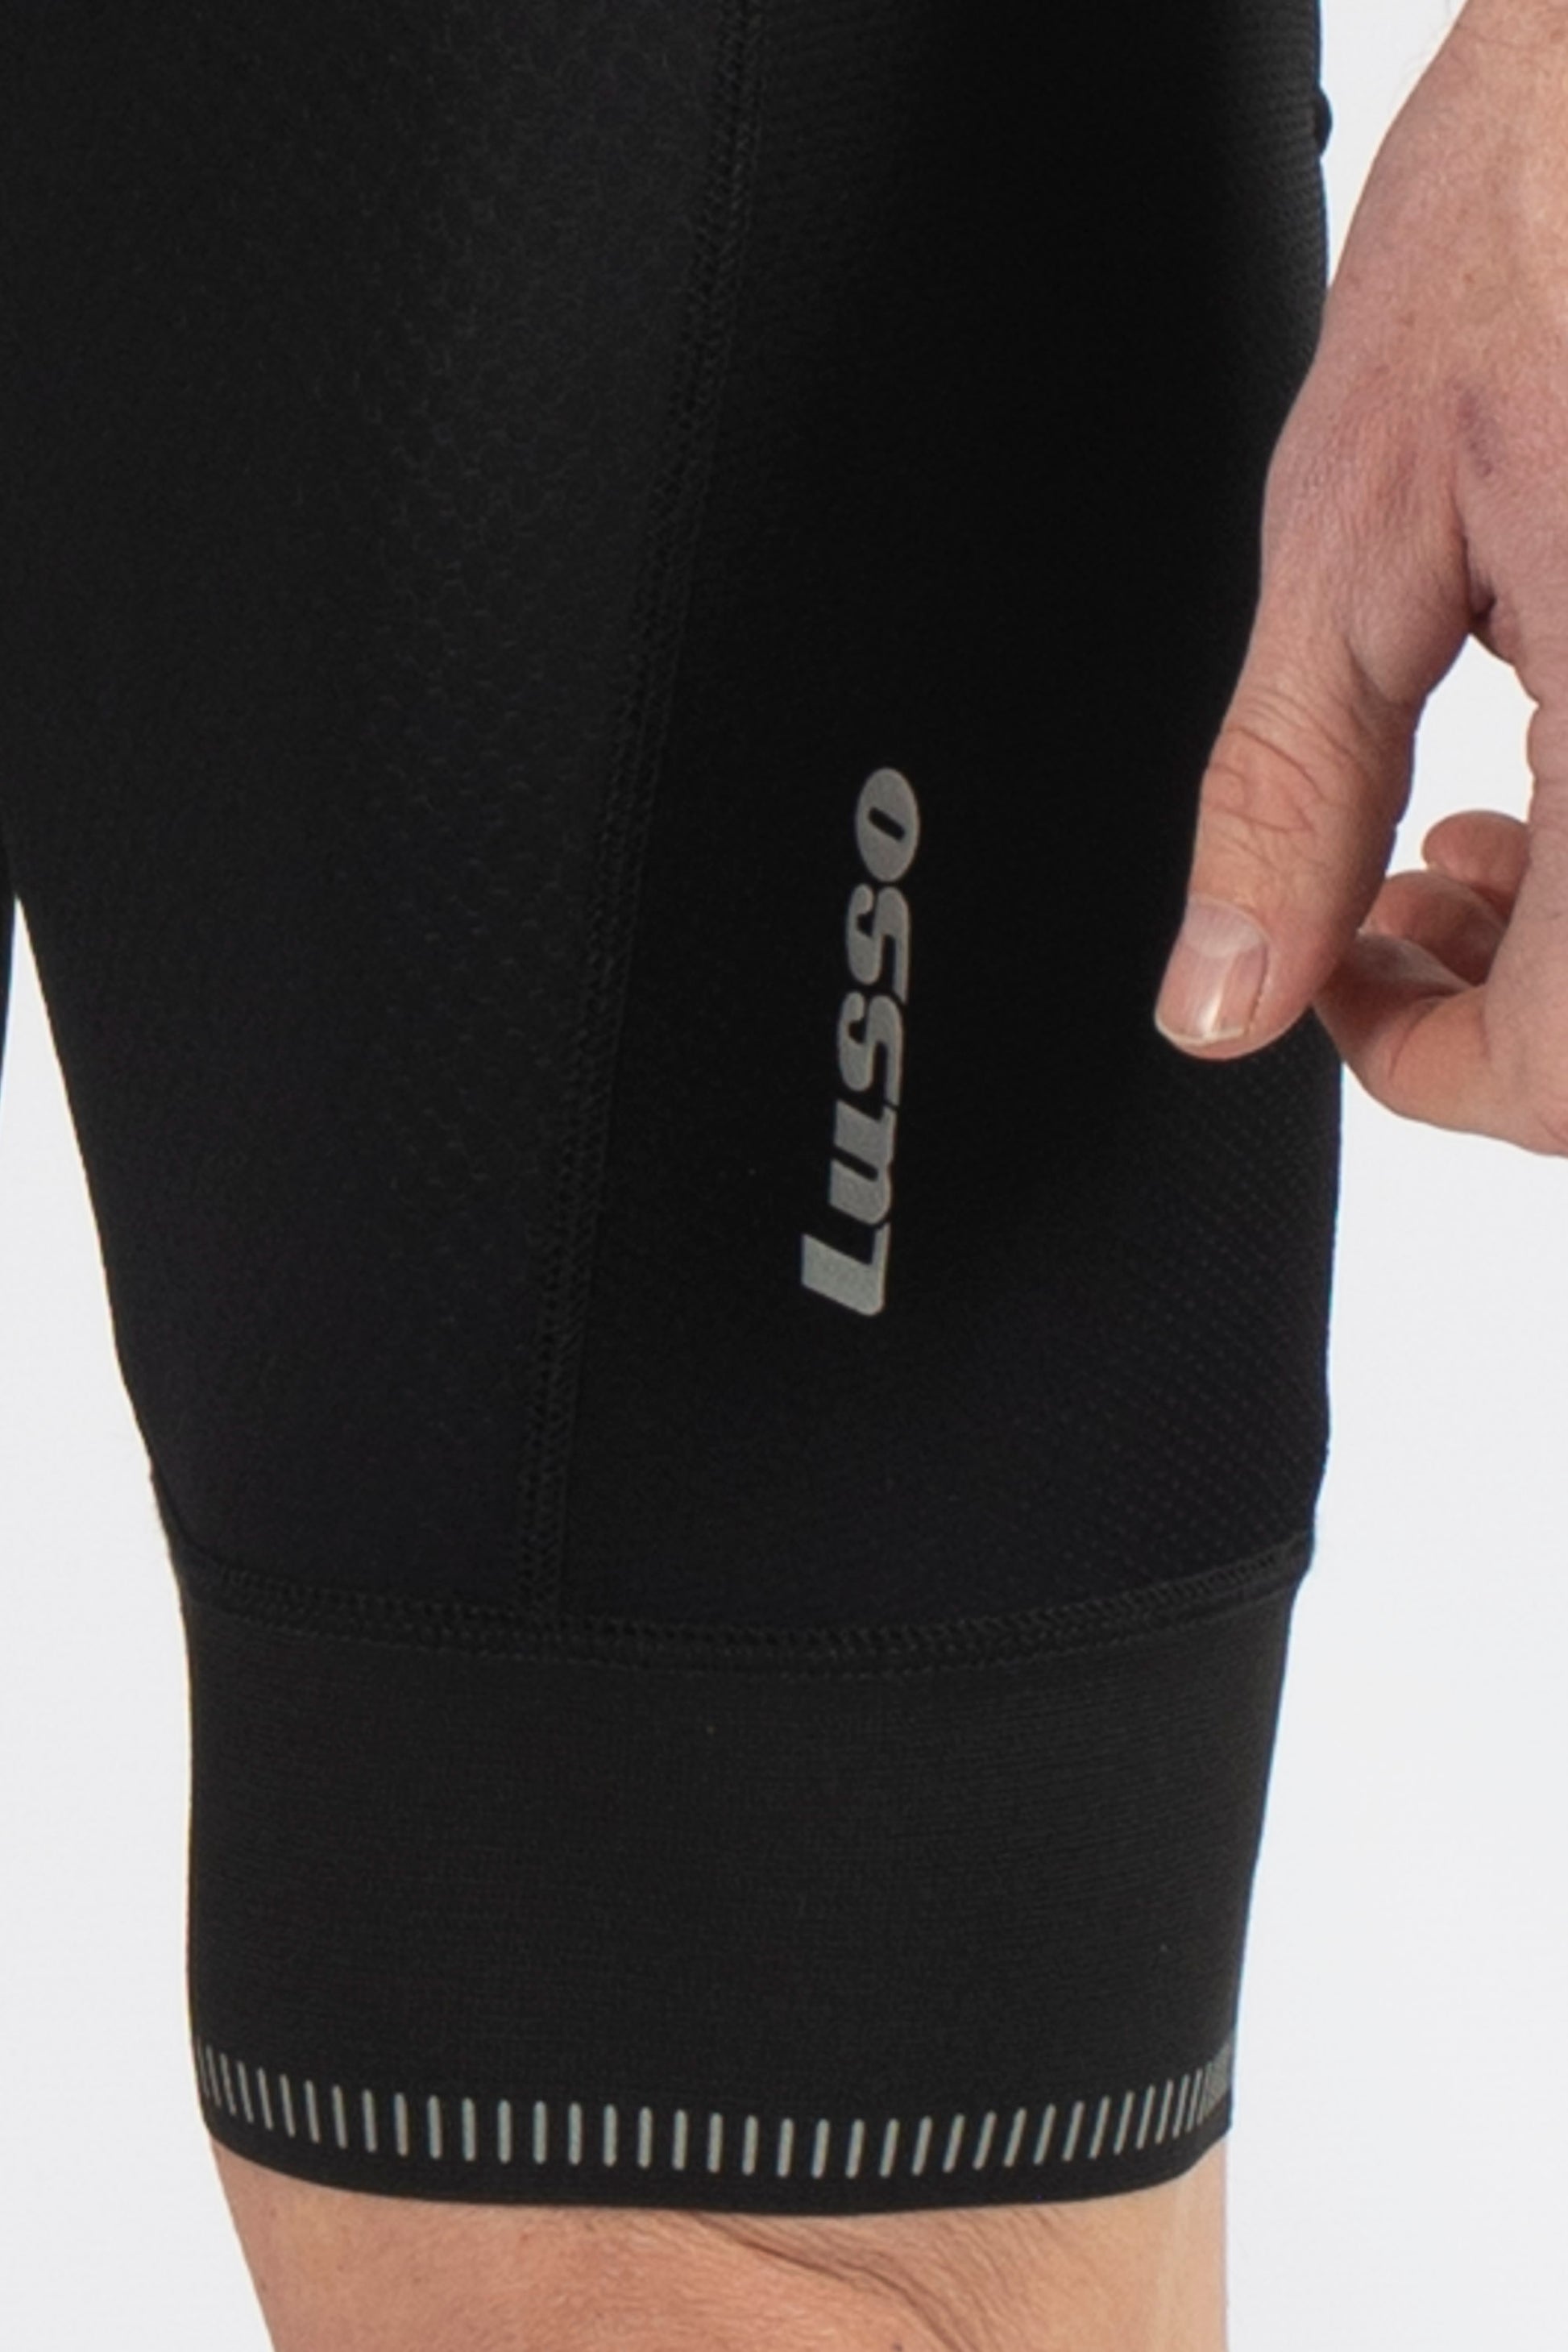 Carbon v2 Bibshorts - Lusso Cycle Wear